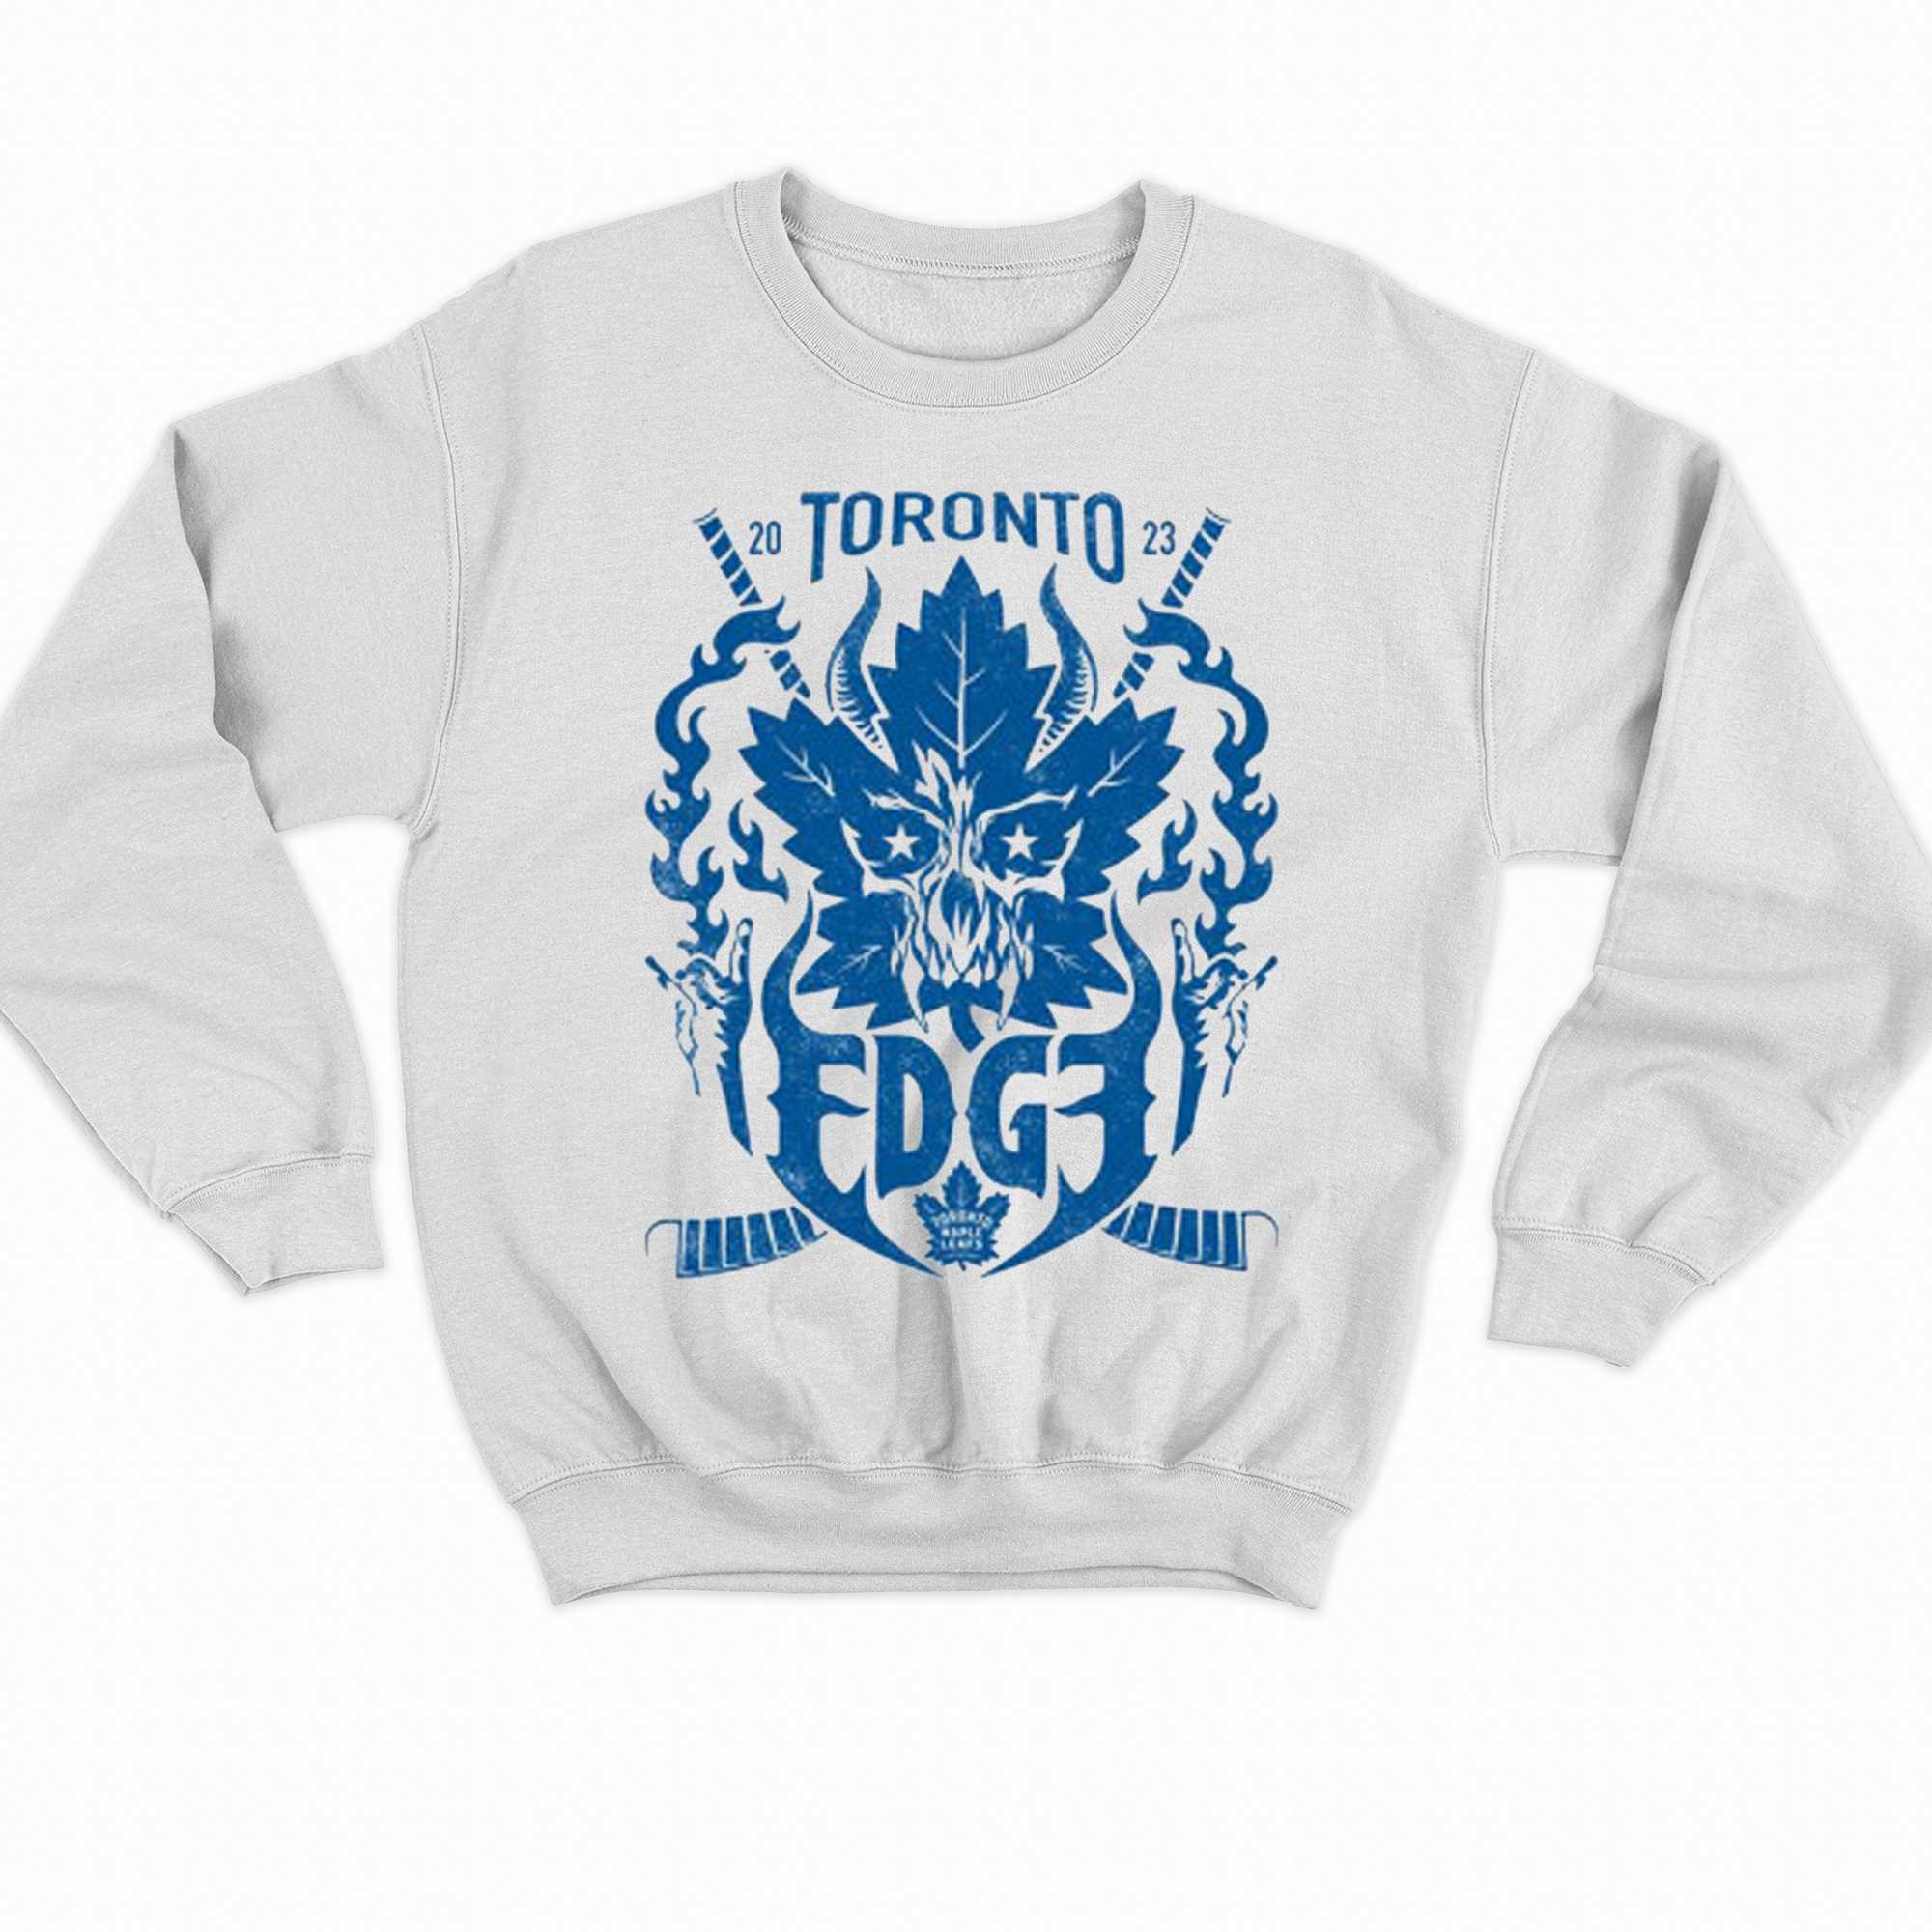 Toronto Maple Leafs And Edge Shirt,Sweater, Hoodie, And Long